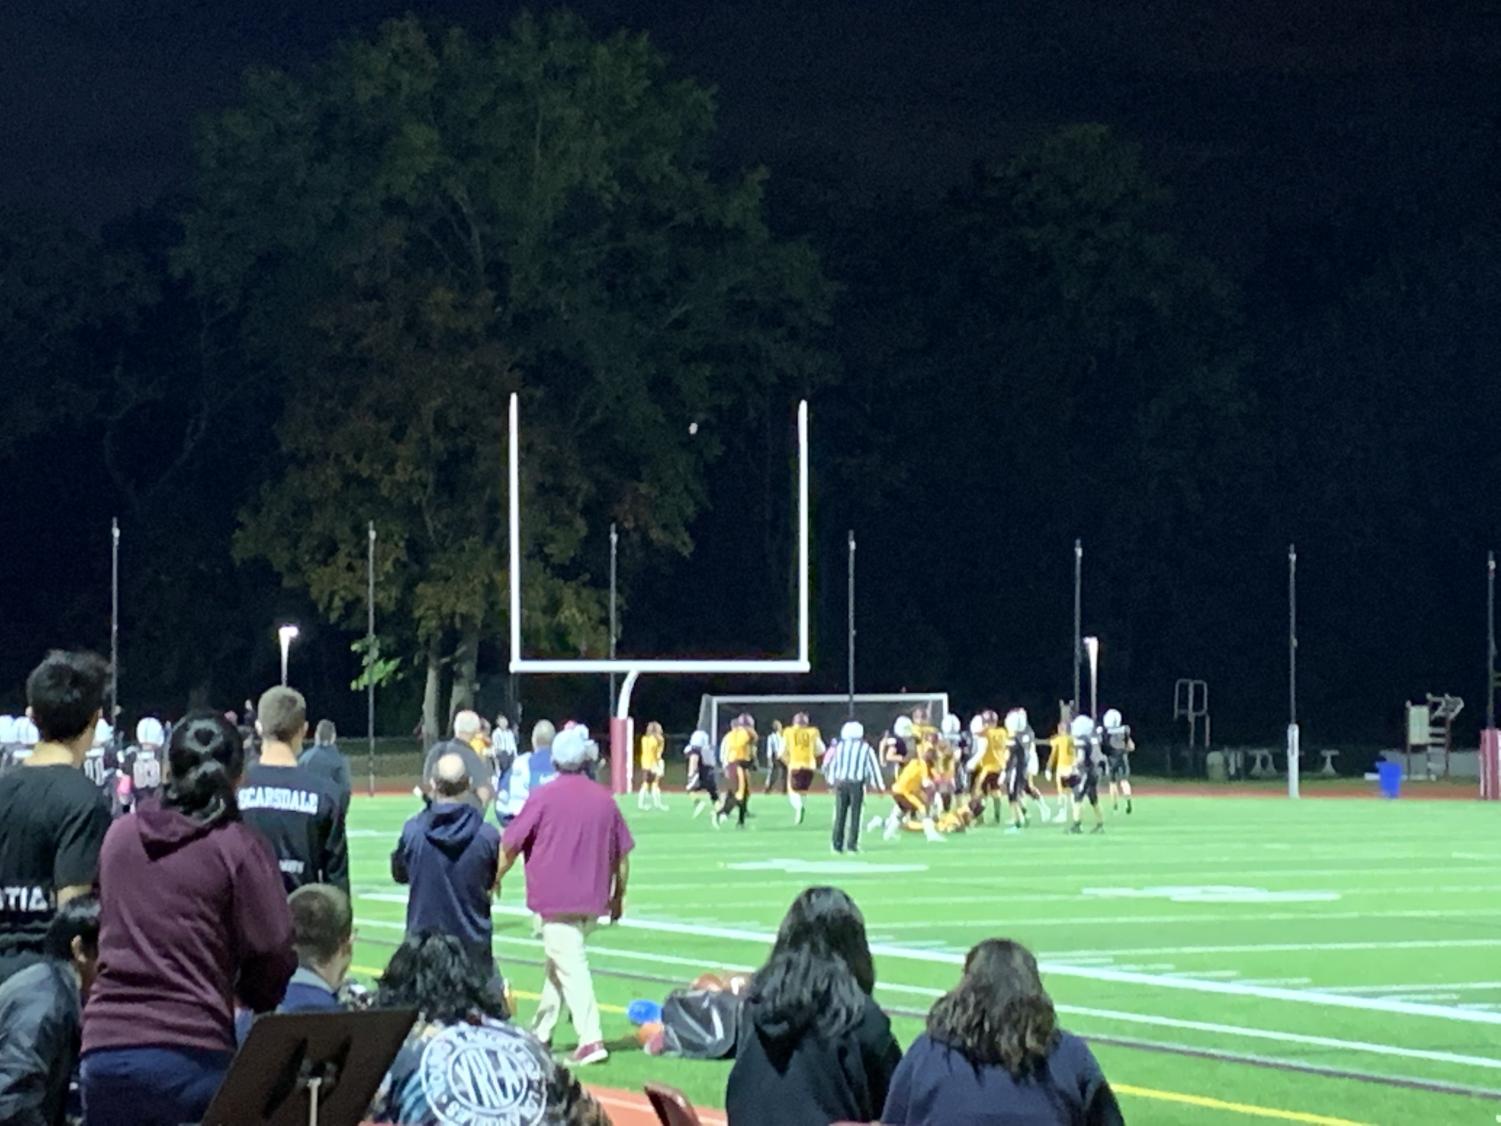 Highlights+from+Scarsdale%E2%80%99s+Senior+Football+Game